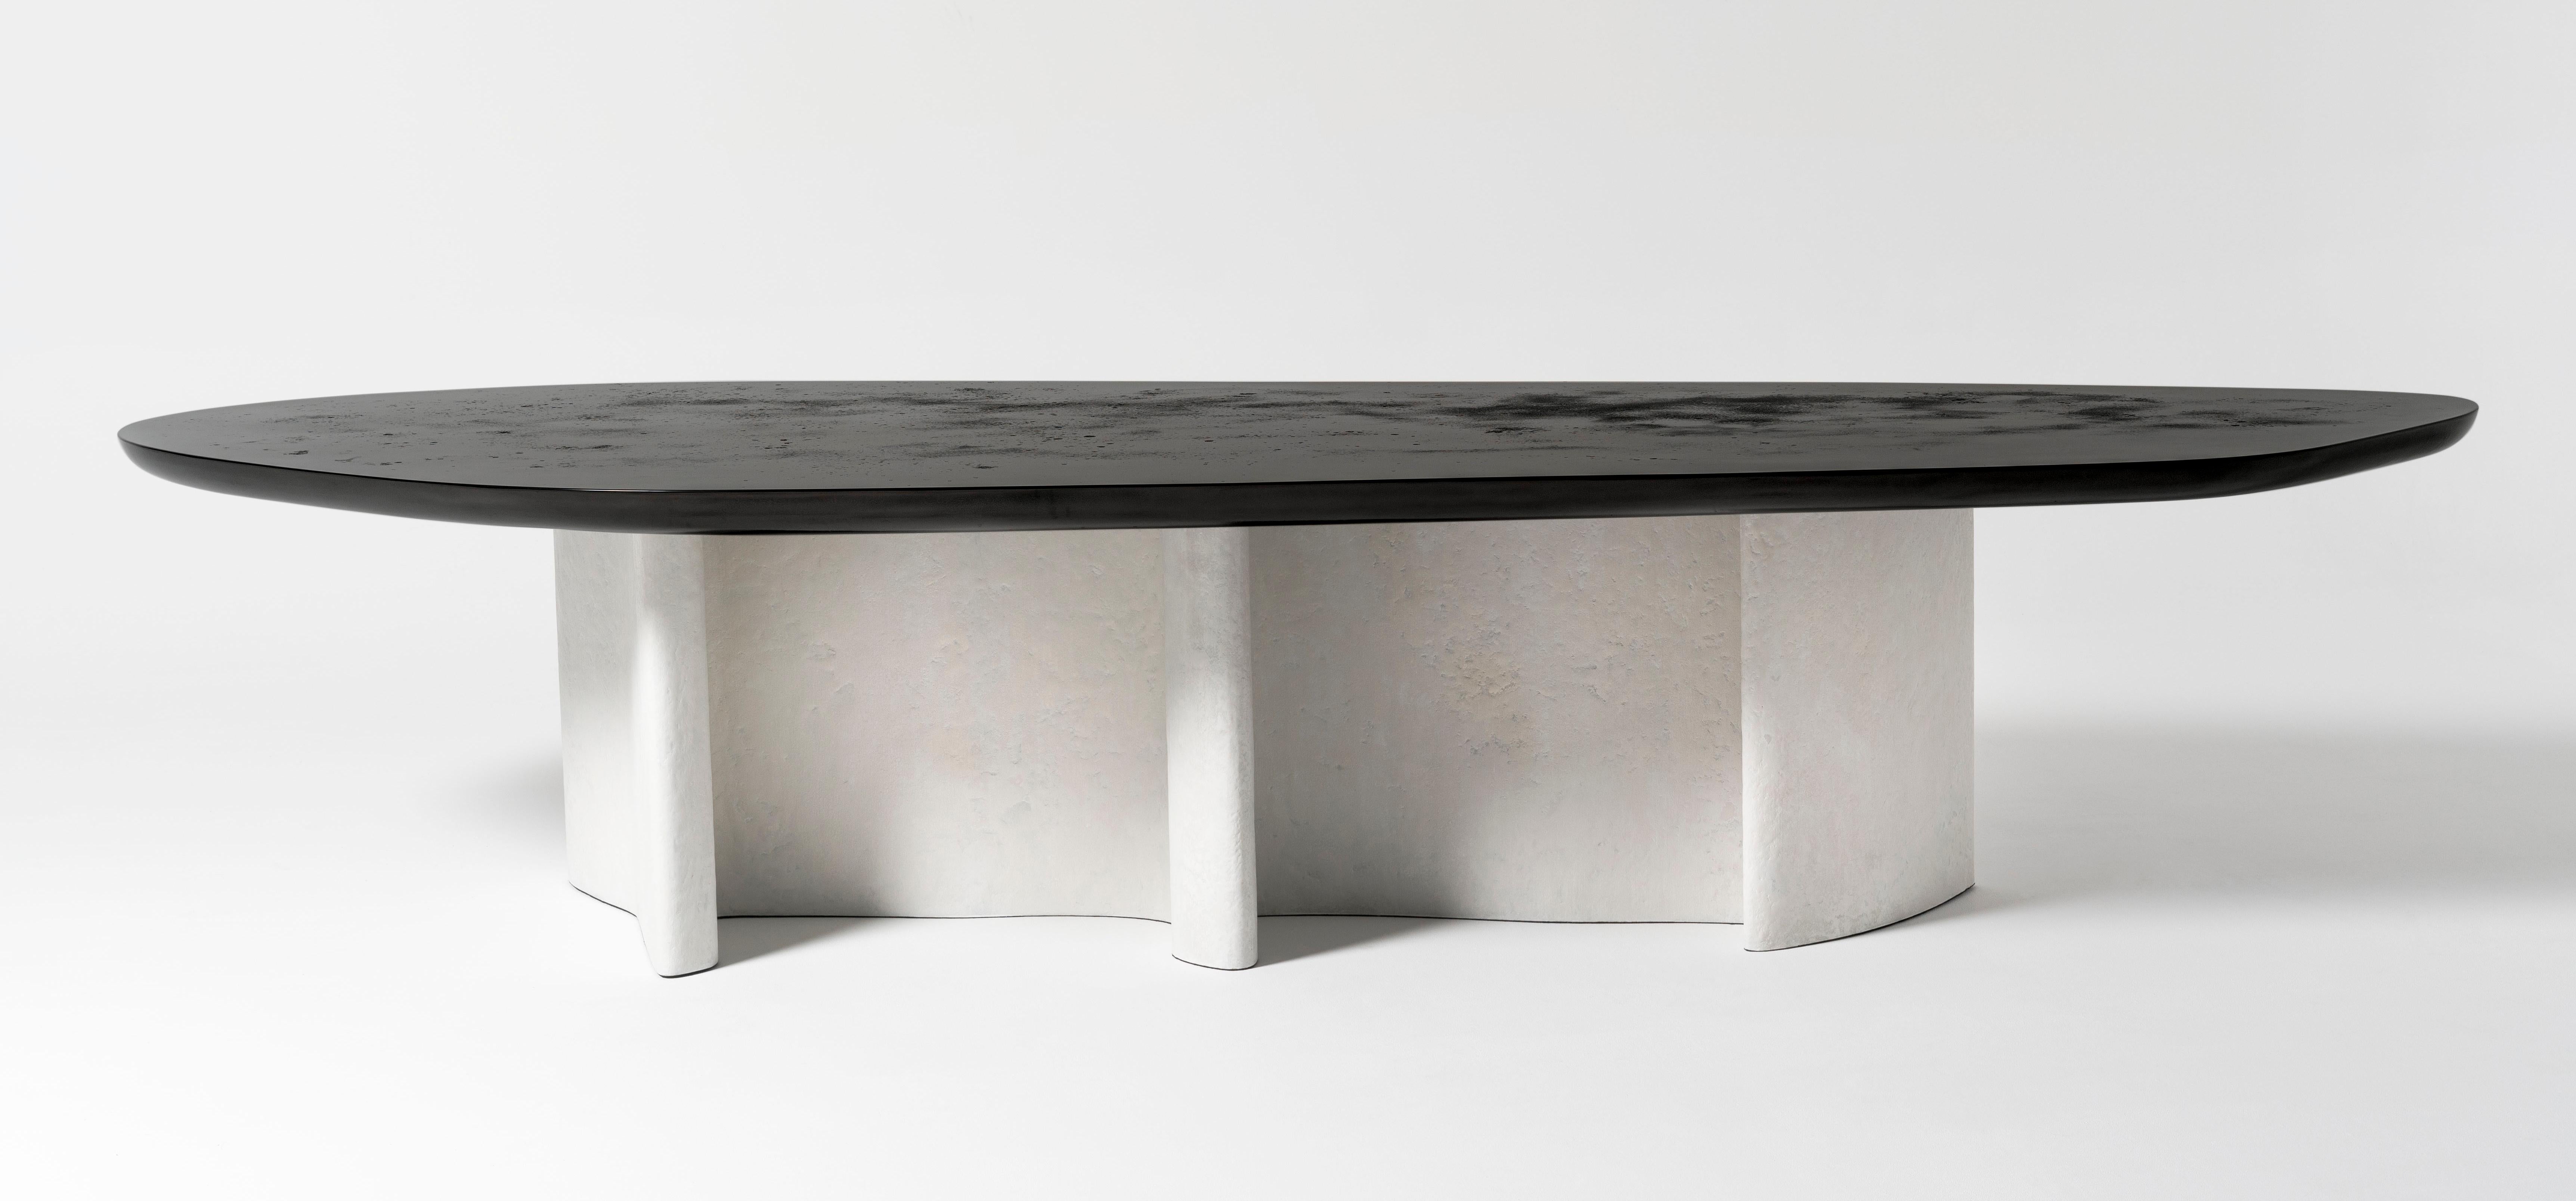 Mantle - 21st century contemporary rounded sculptural large dining table

Inherited the meandering shape of the mantle ray, the Mantle table base is like a swimming ray in the ocean depth. Its organic form contrasts with its structure that resembles